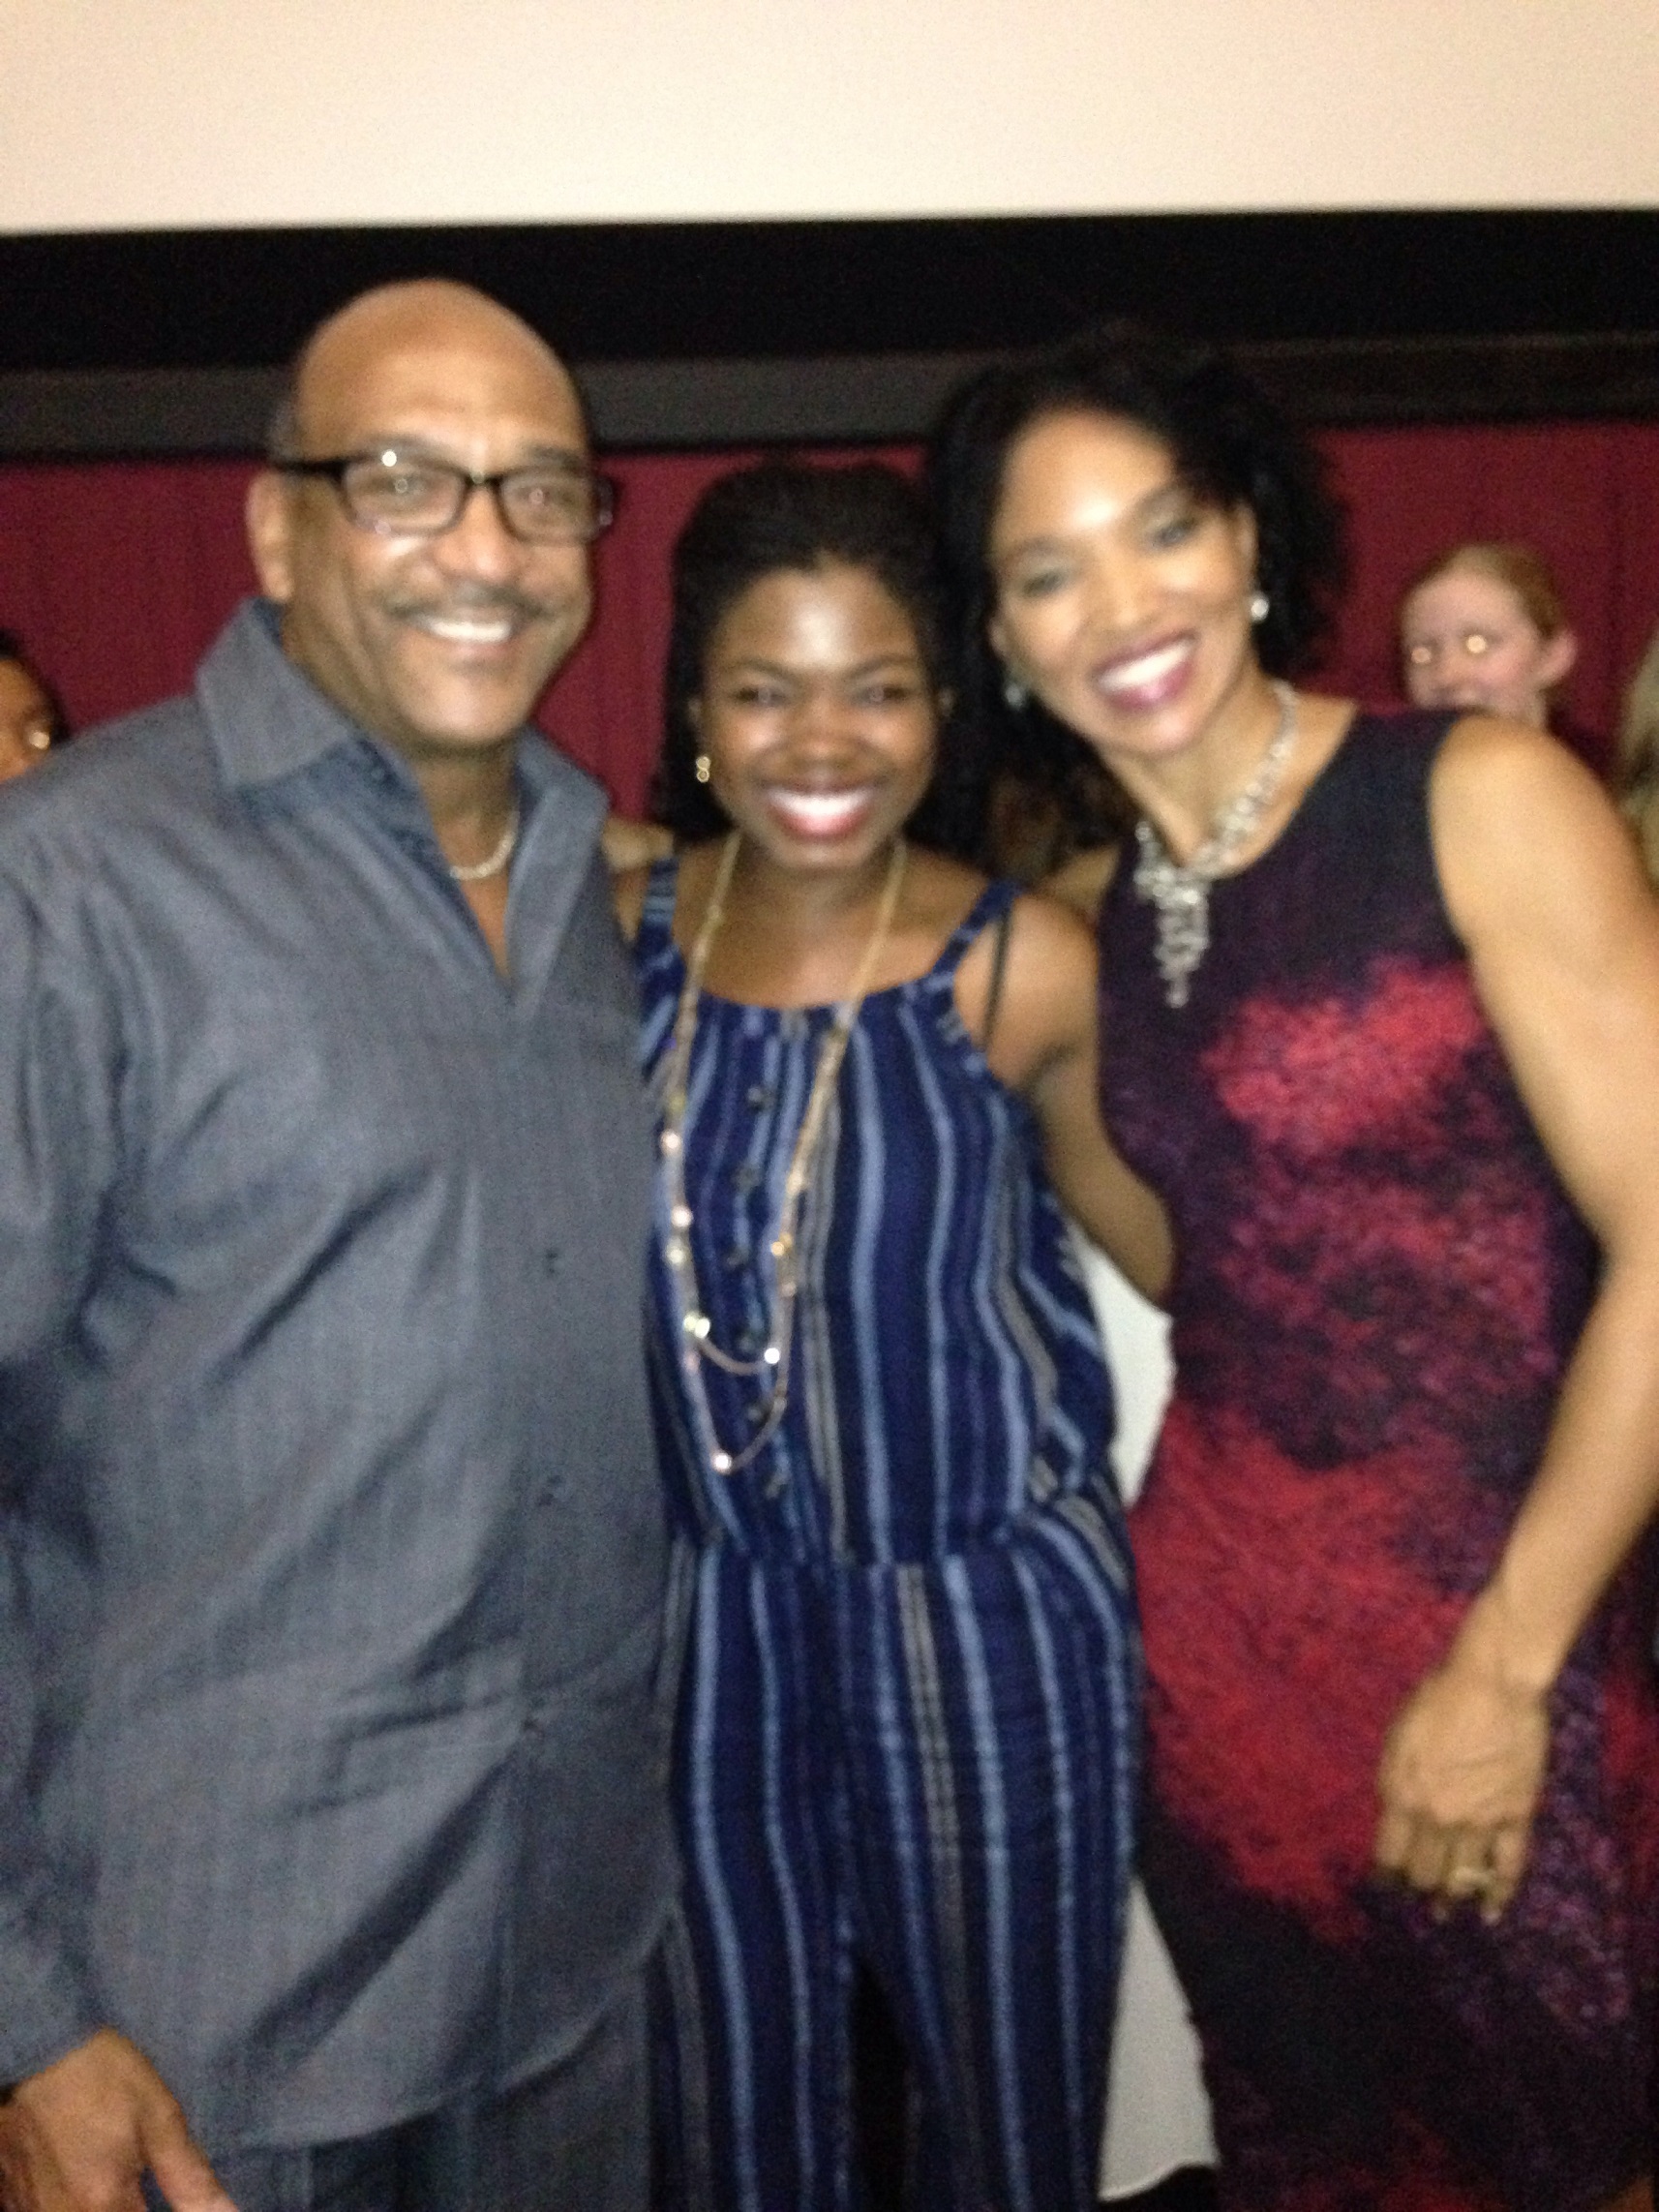 Tony Vaughn, Kyanna Simone, Lisa Arrindell Anderson at the premiere of A Christmas Blessing.